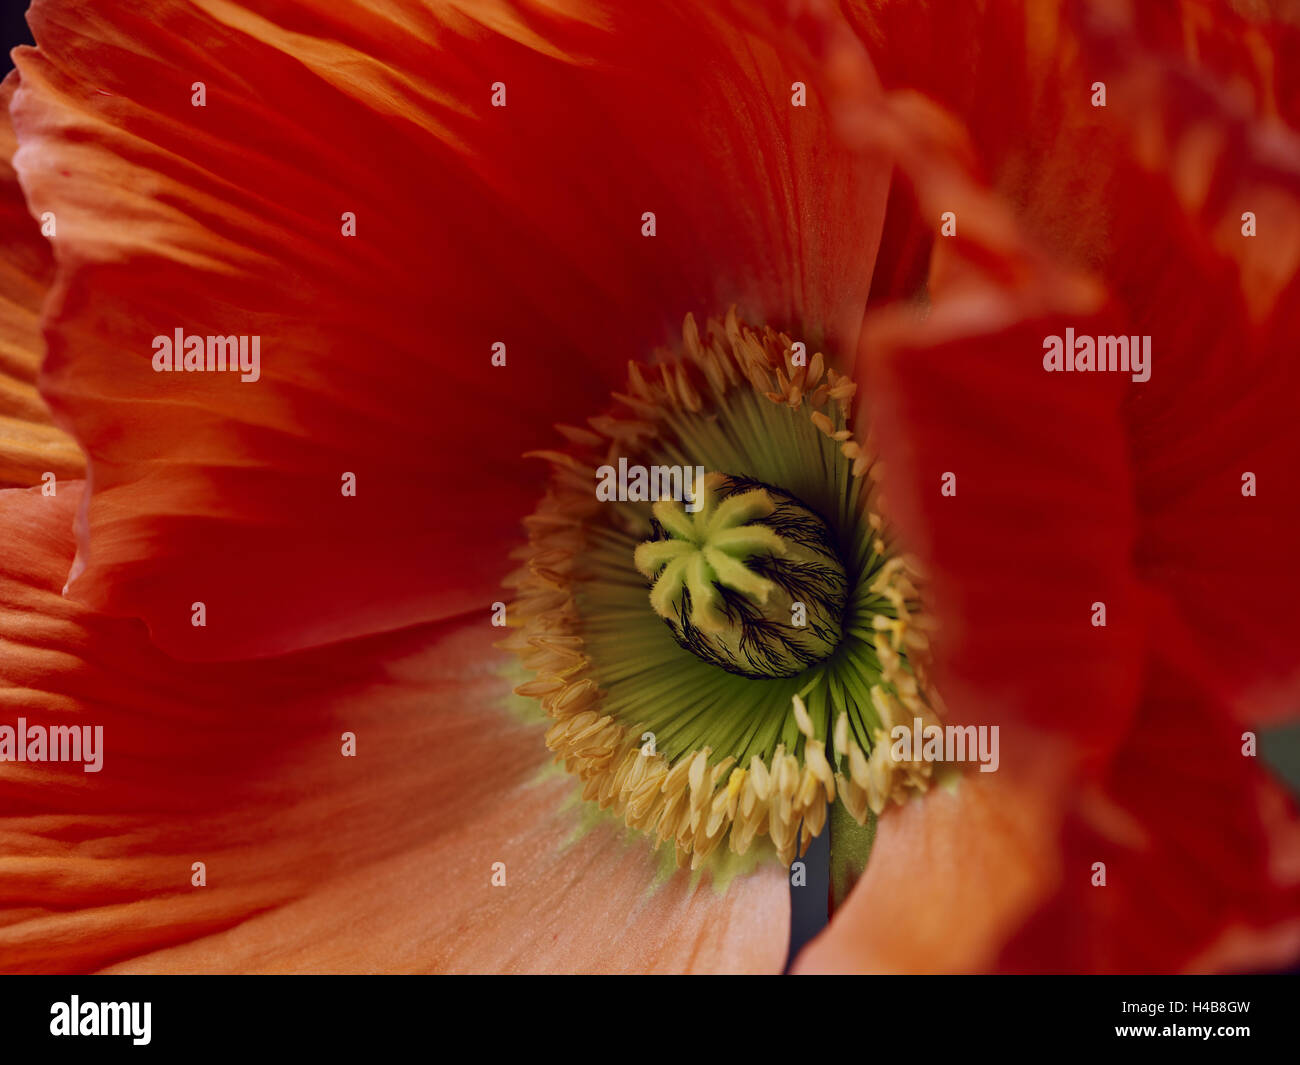 Coquelicot, blossom, calice, close-up, Banque D'Images